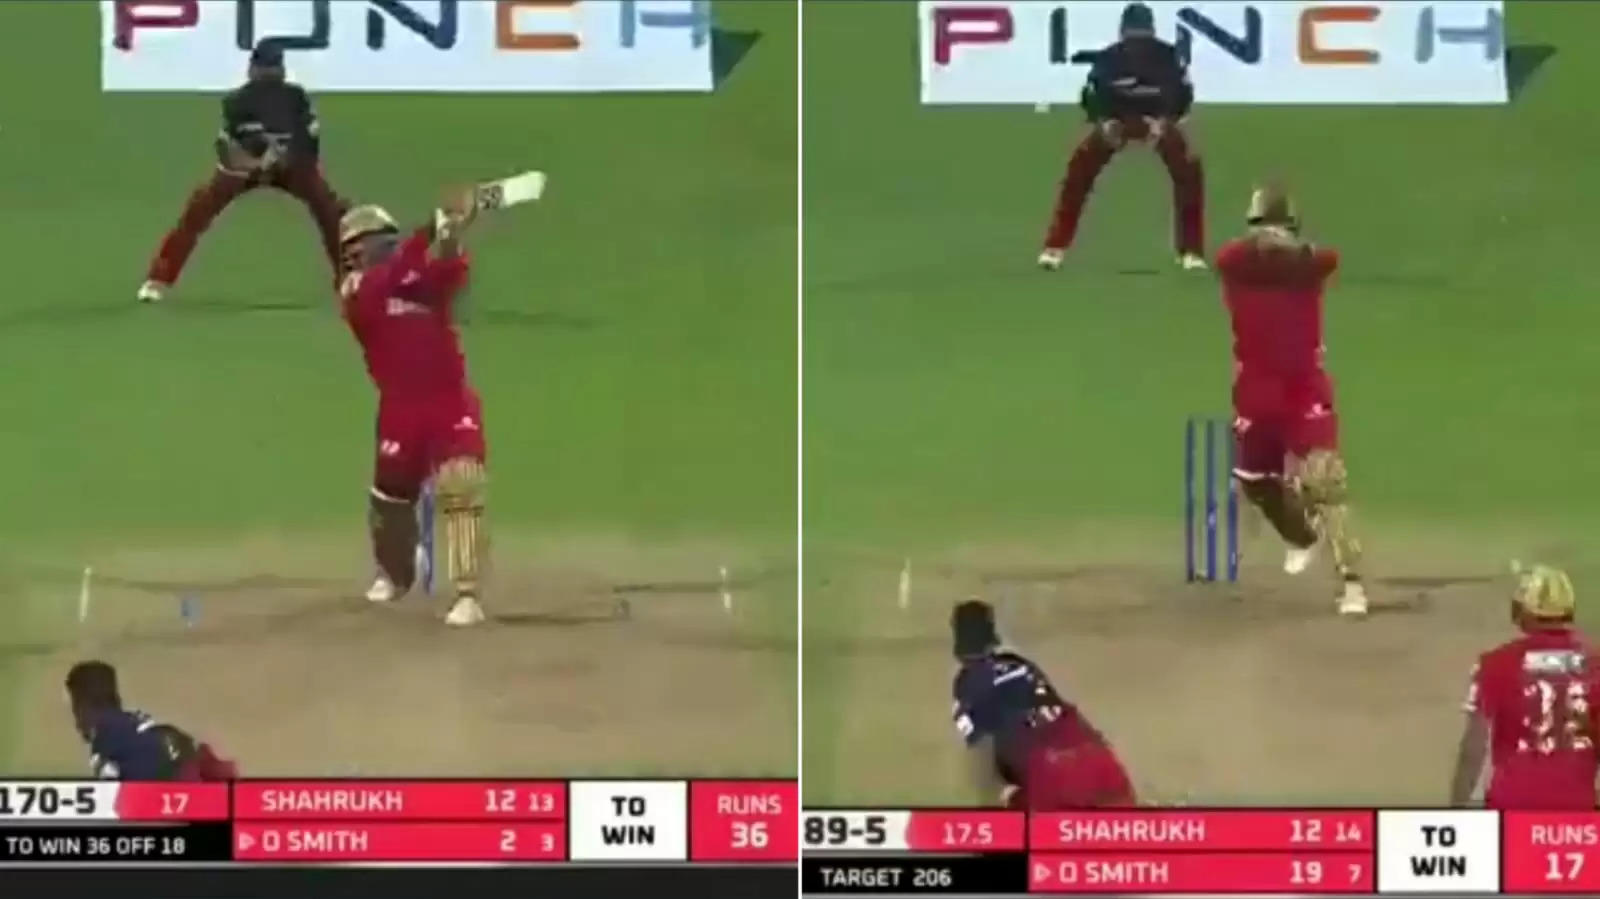 WATCH: 6, 6, 6 – Odean Smith smashing three sixes off Mohammed Siraj in the 18th over of tense run chase